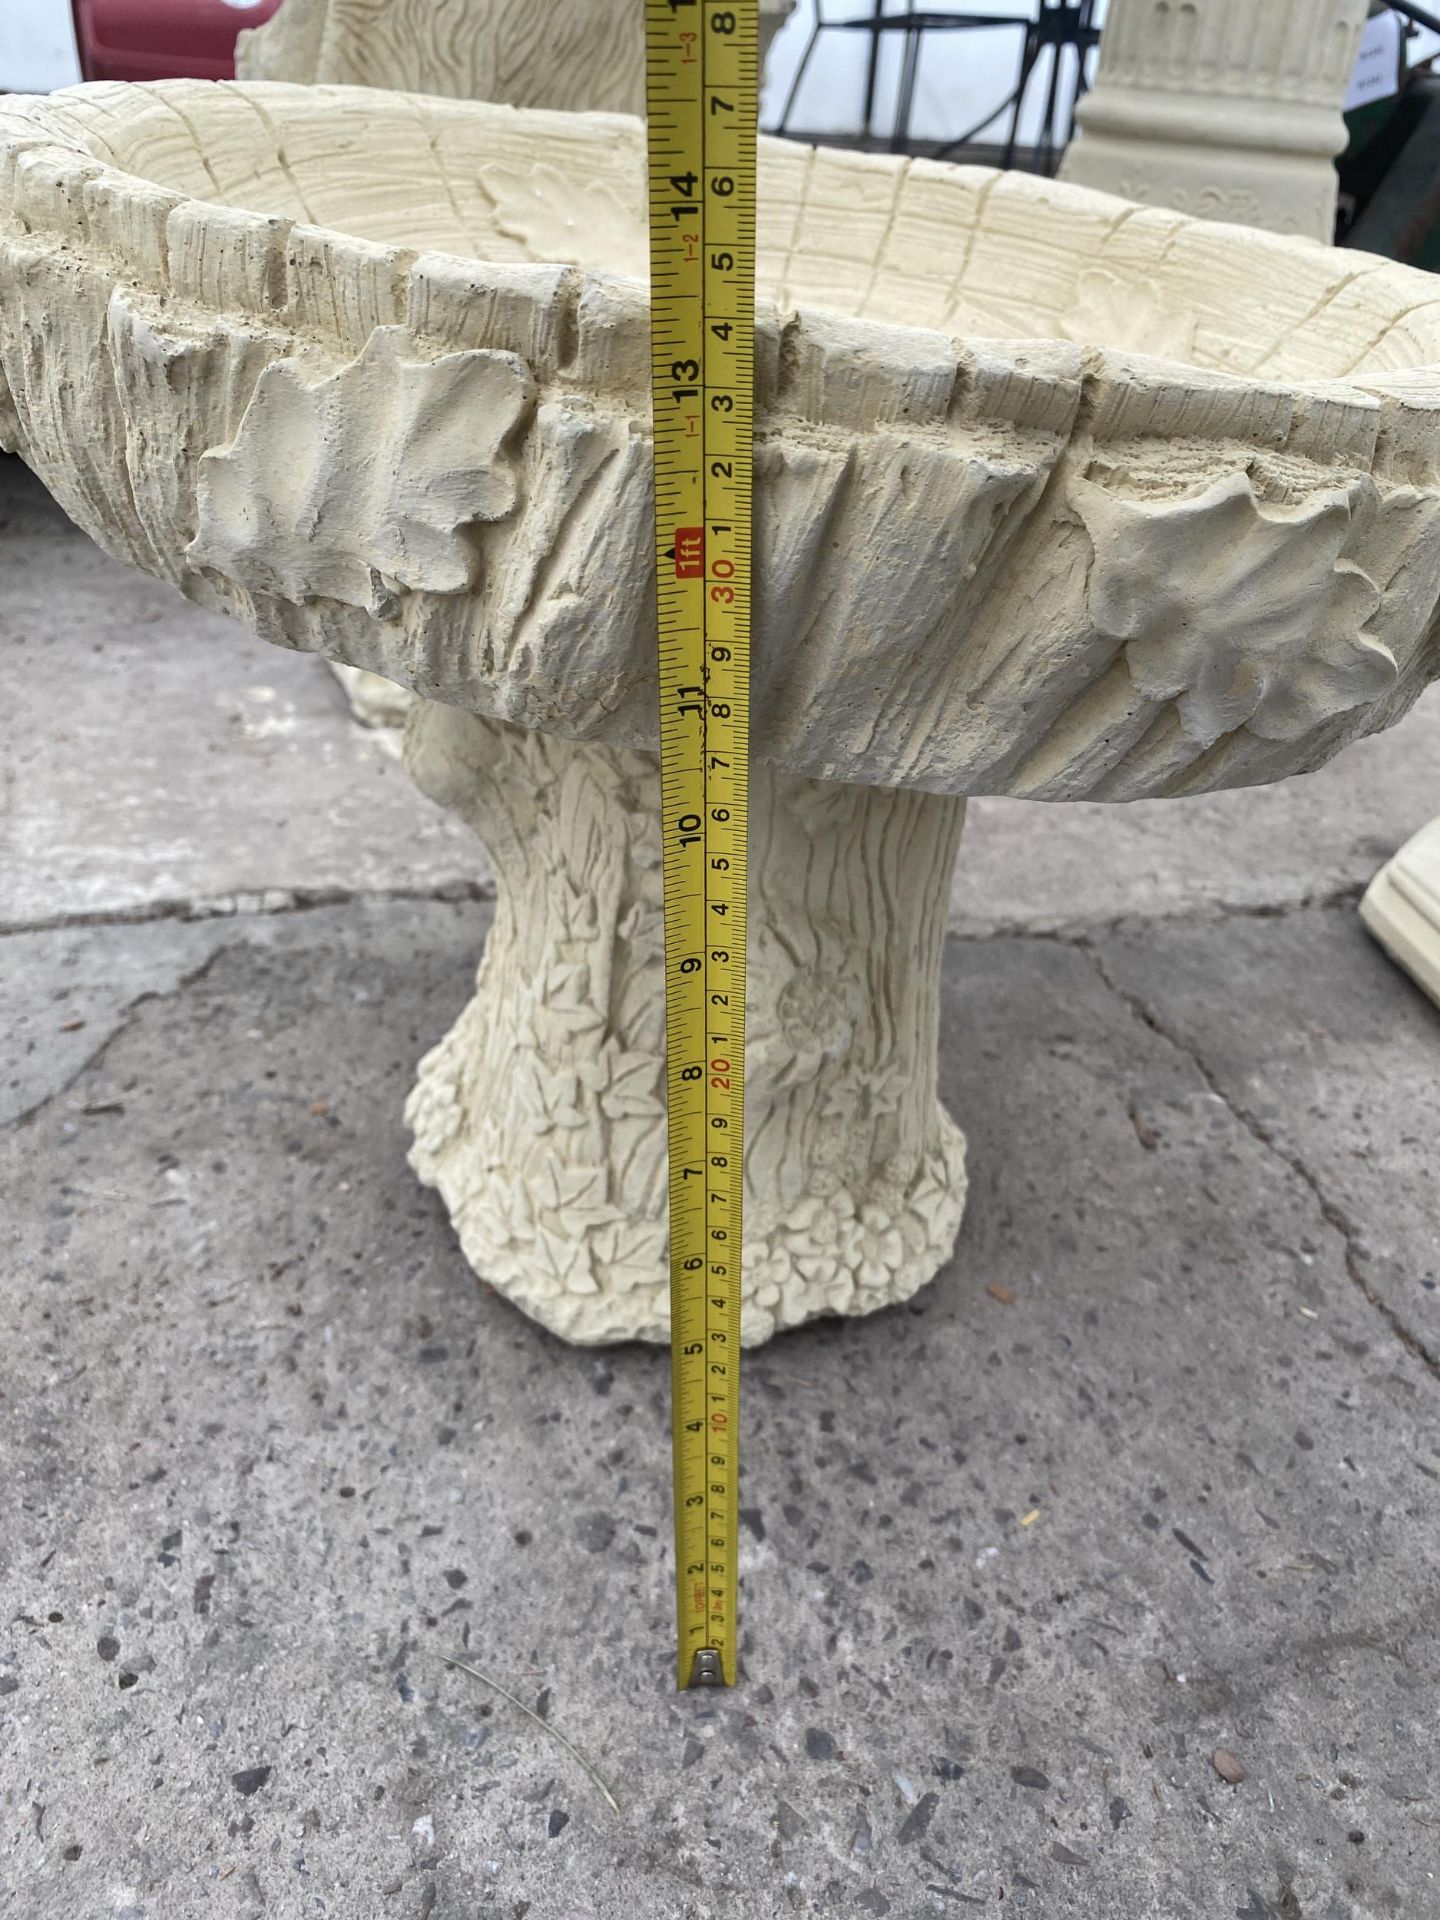 AN AS NEW EX DISPLAY CONCRETE IVY LOG BIRDBATH *PLEASE NOTE VAT TO BE PAID ON THIS ITEM* - Image 4 of 4